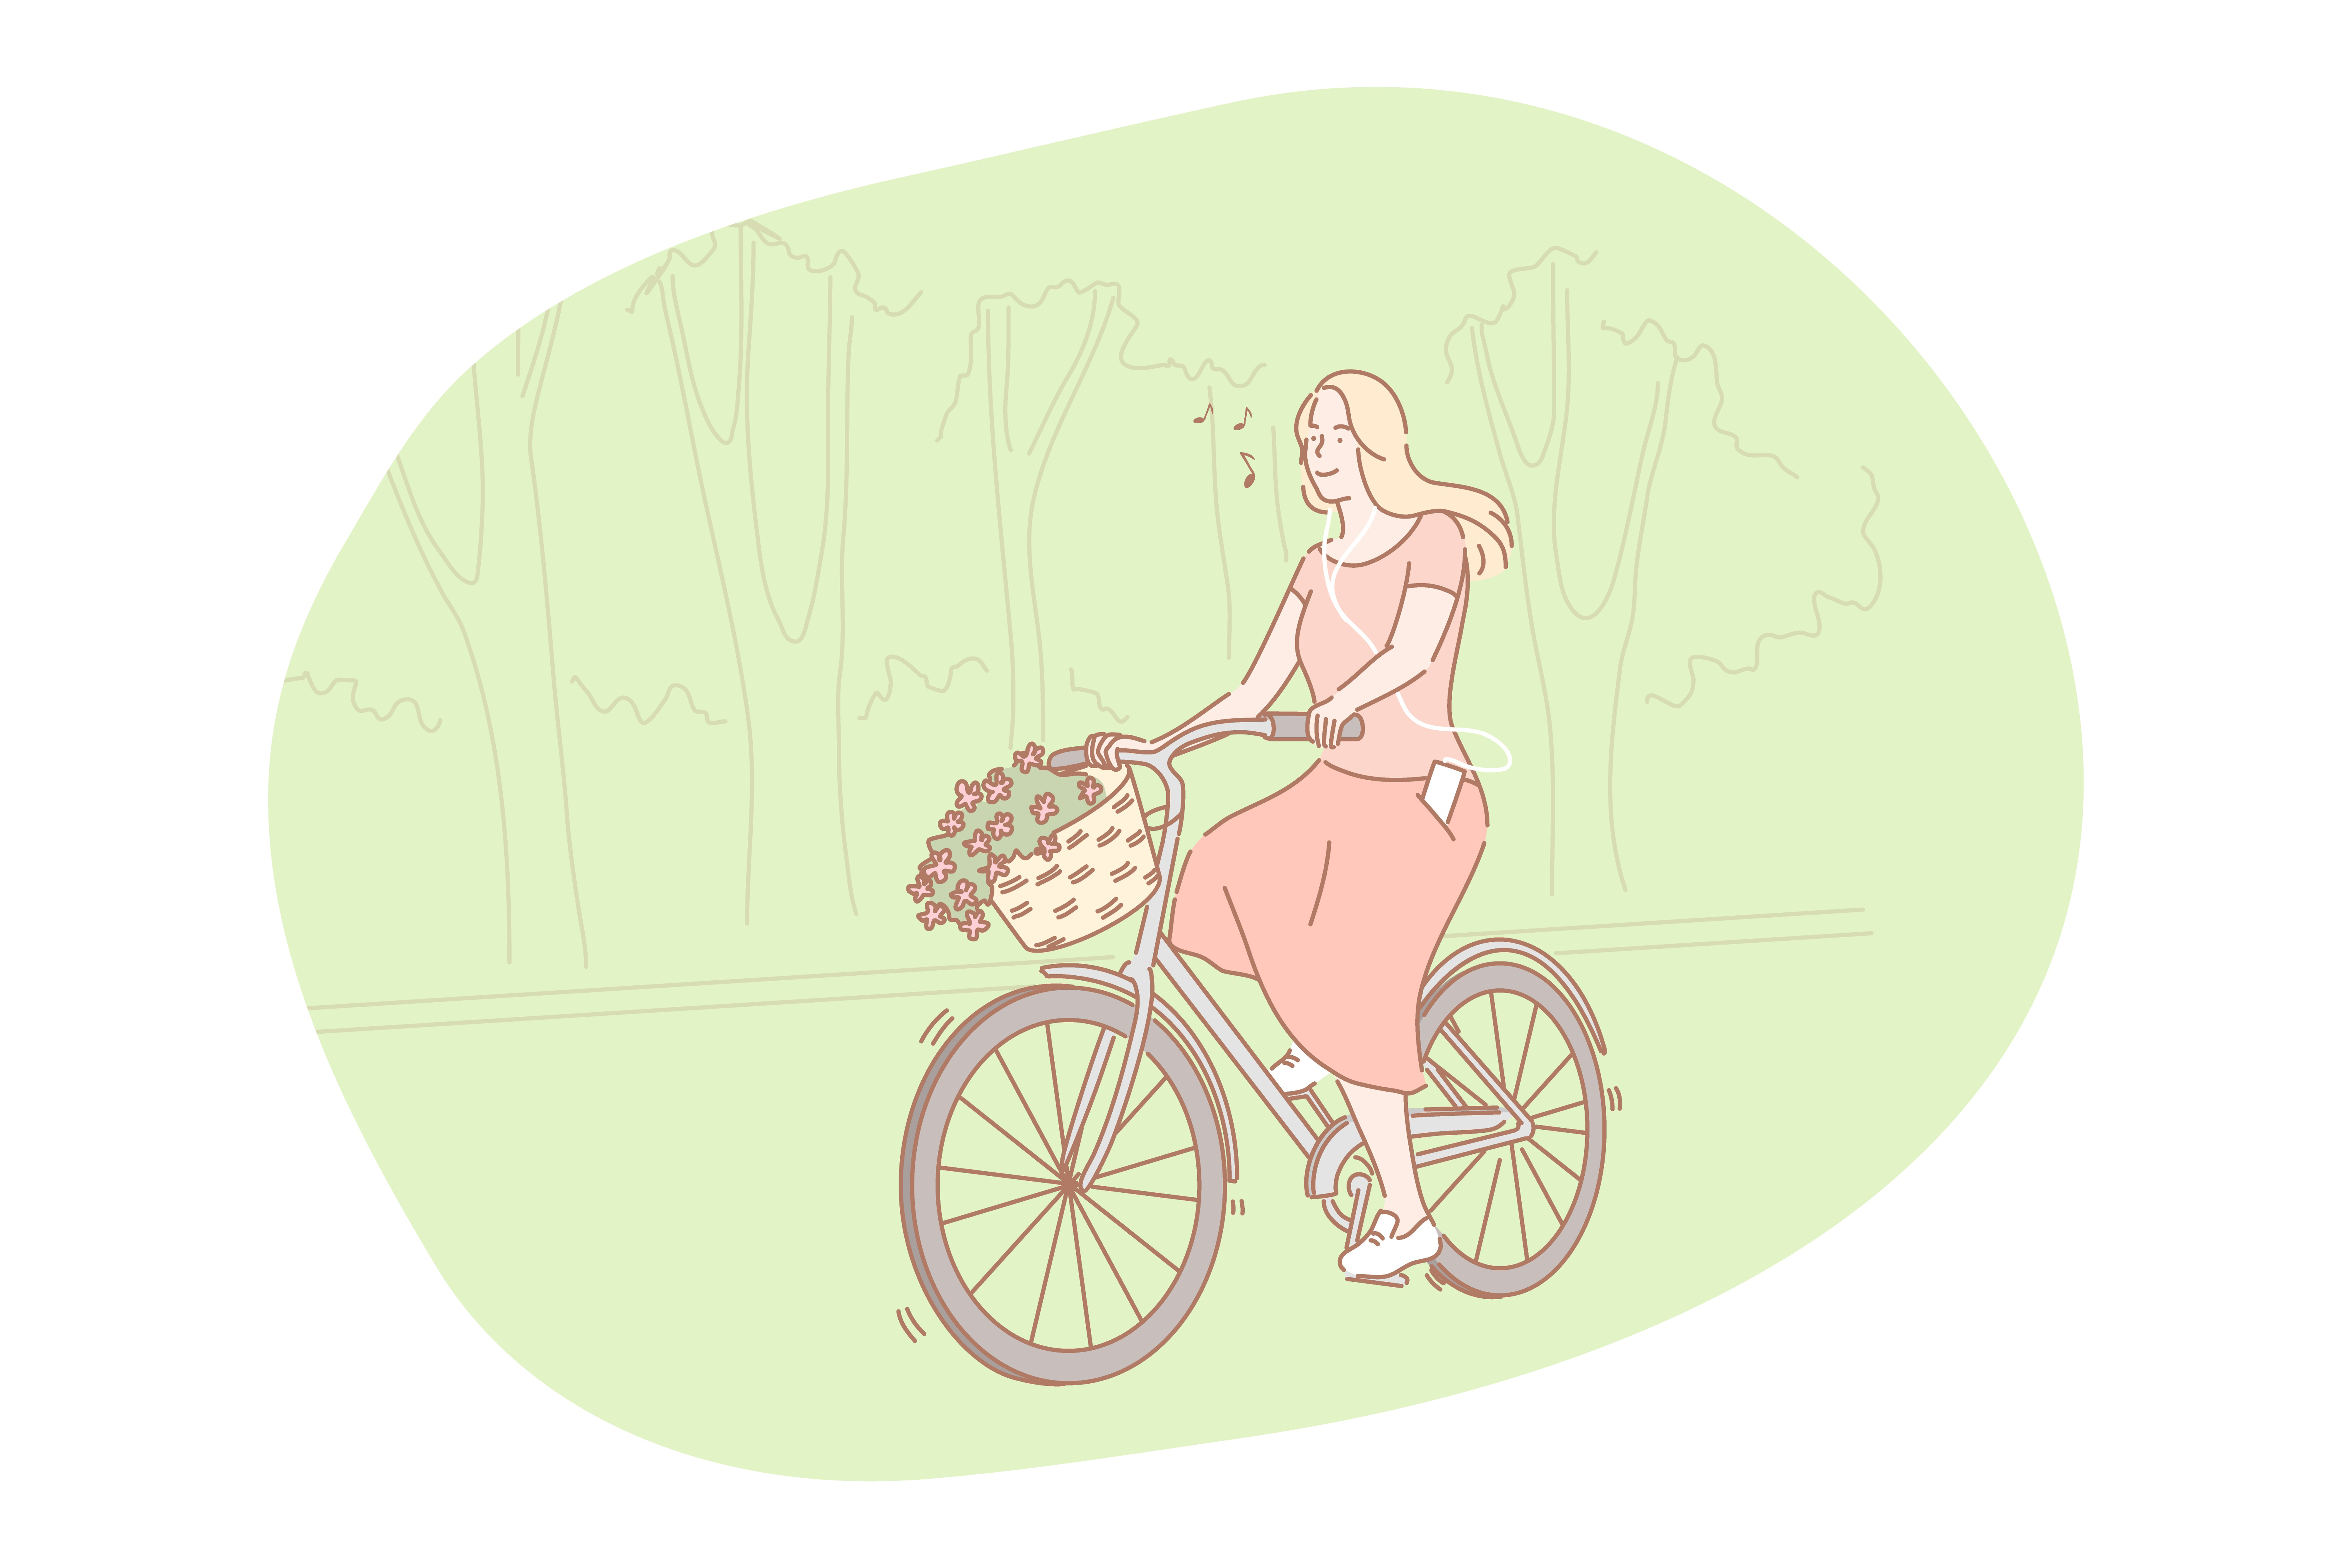 Riding bicycle in summer concept. Young smiling woman cartoon character in dress enjoying going on bicycle and listening to music in park in summer. Transportation, leisure, entertainment . Riding bicycle in summer concept